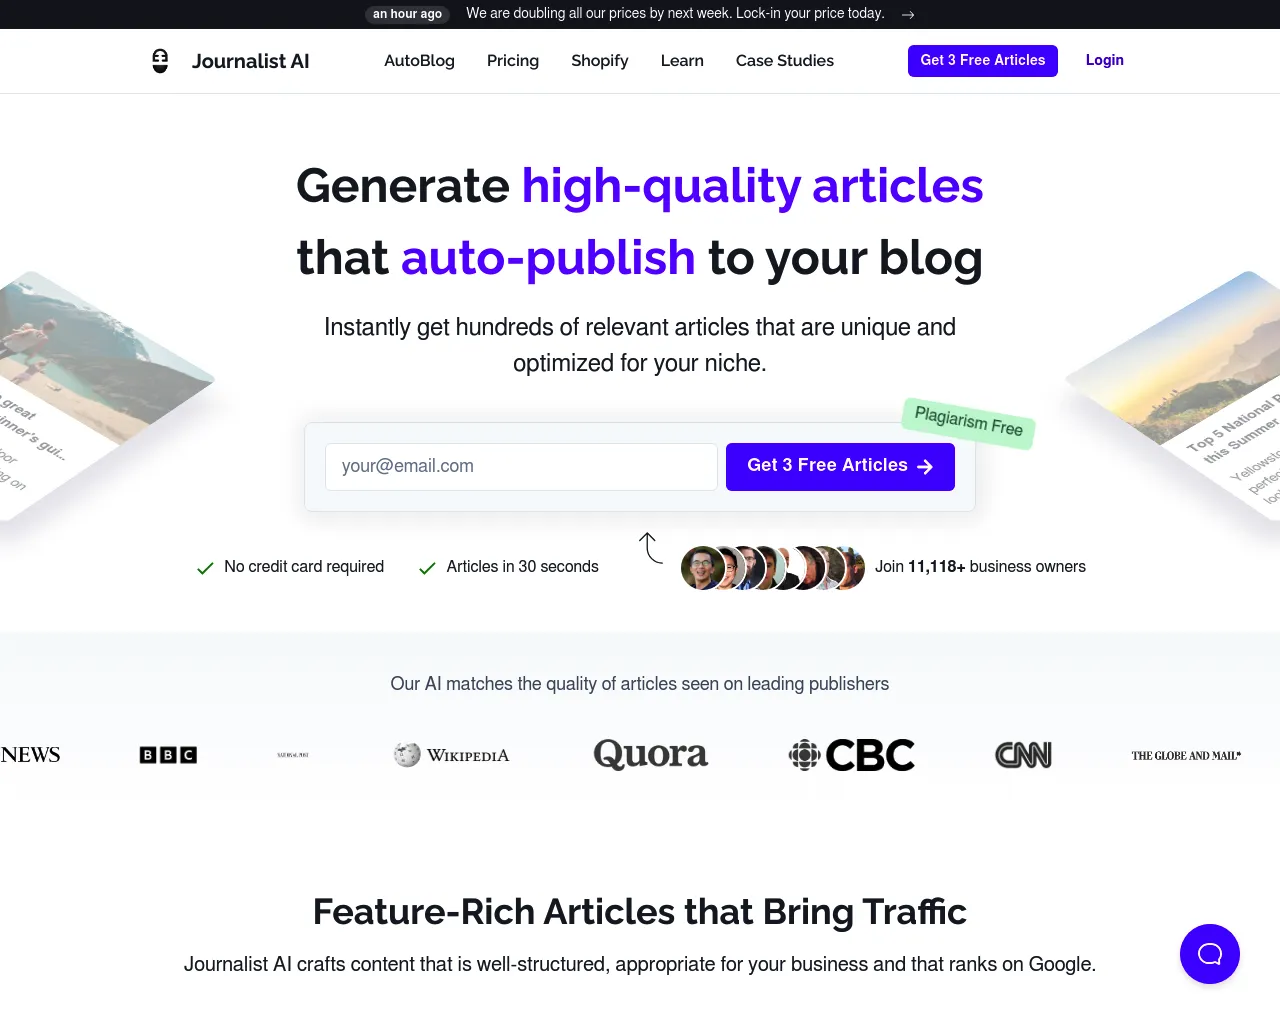 Generate high-quality articles that auto-publish to your blog